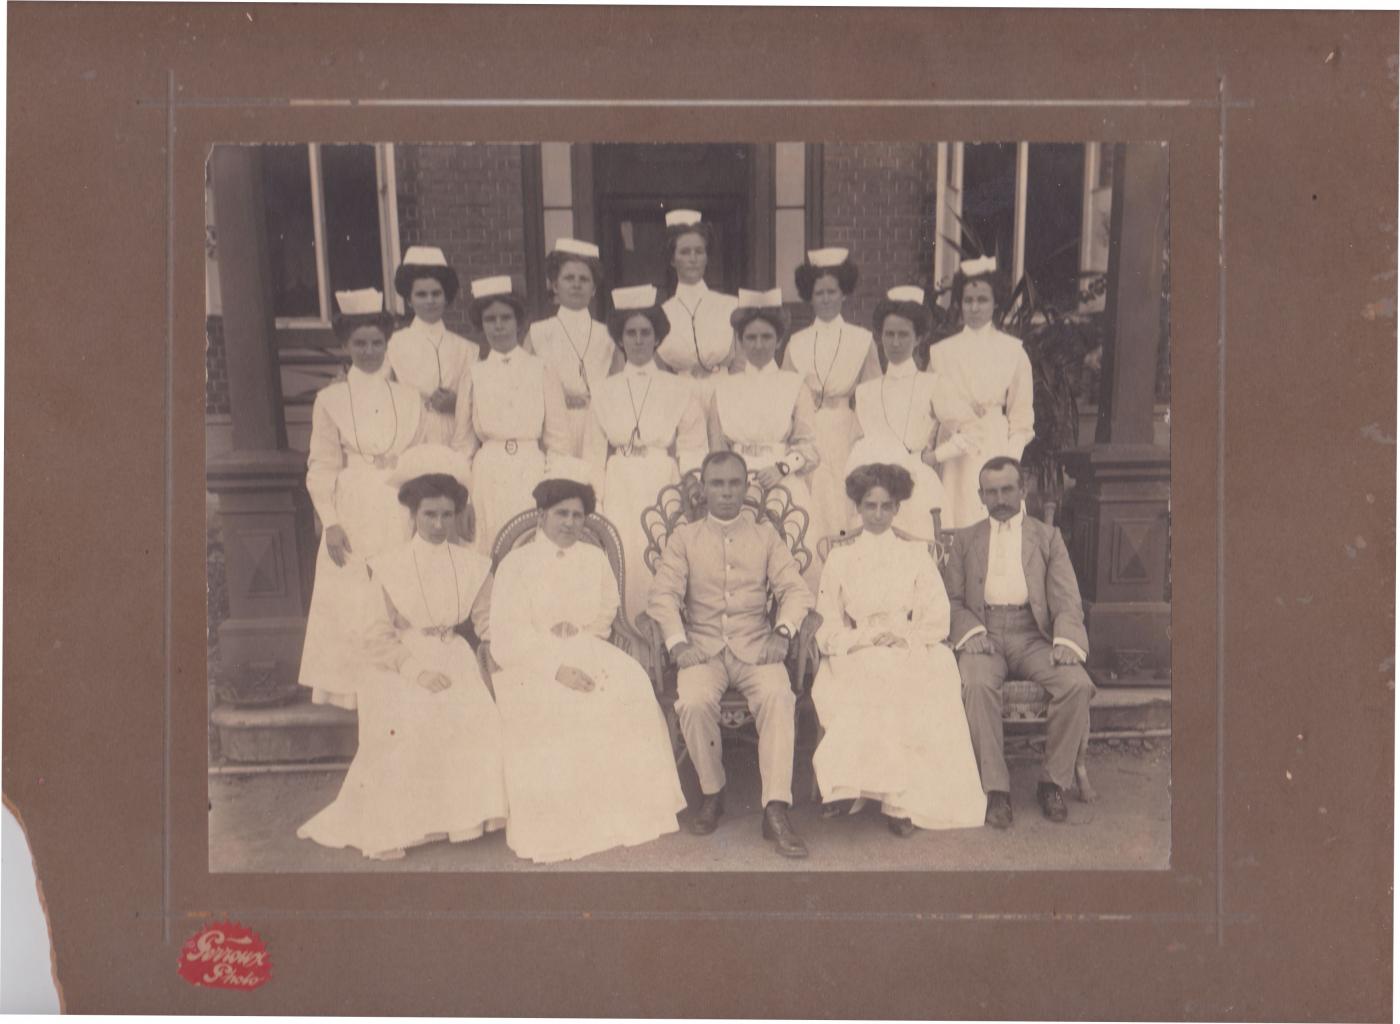 Black and white photograph taken at Rockhampton hospital showing newly graduated nurses, and staff members surrounding a doctor, who is seated centrally in the front row.  The nurses wear starched white uniforms and caps, and the doctor wears a light coloured suit. A second gentleman at the right of the front row may be the anaesthetist.